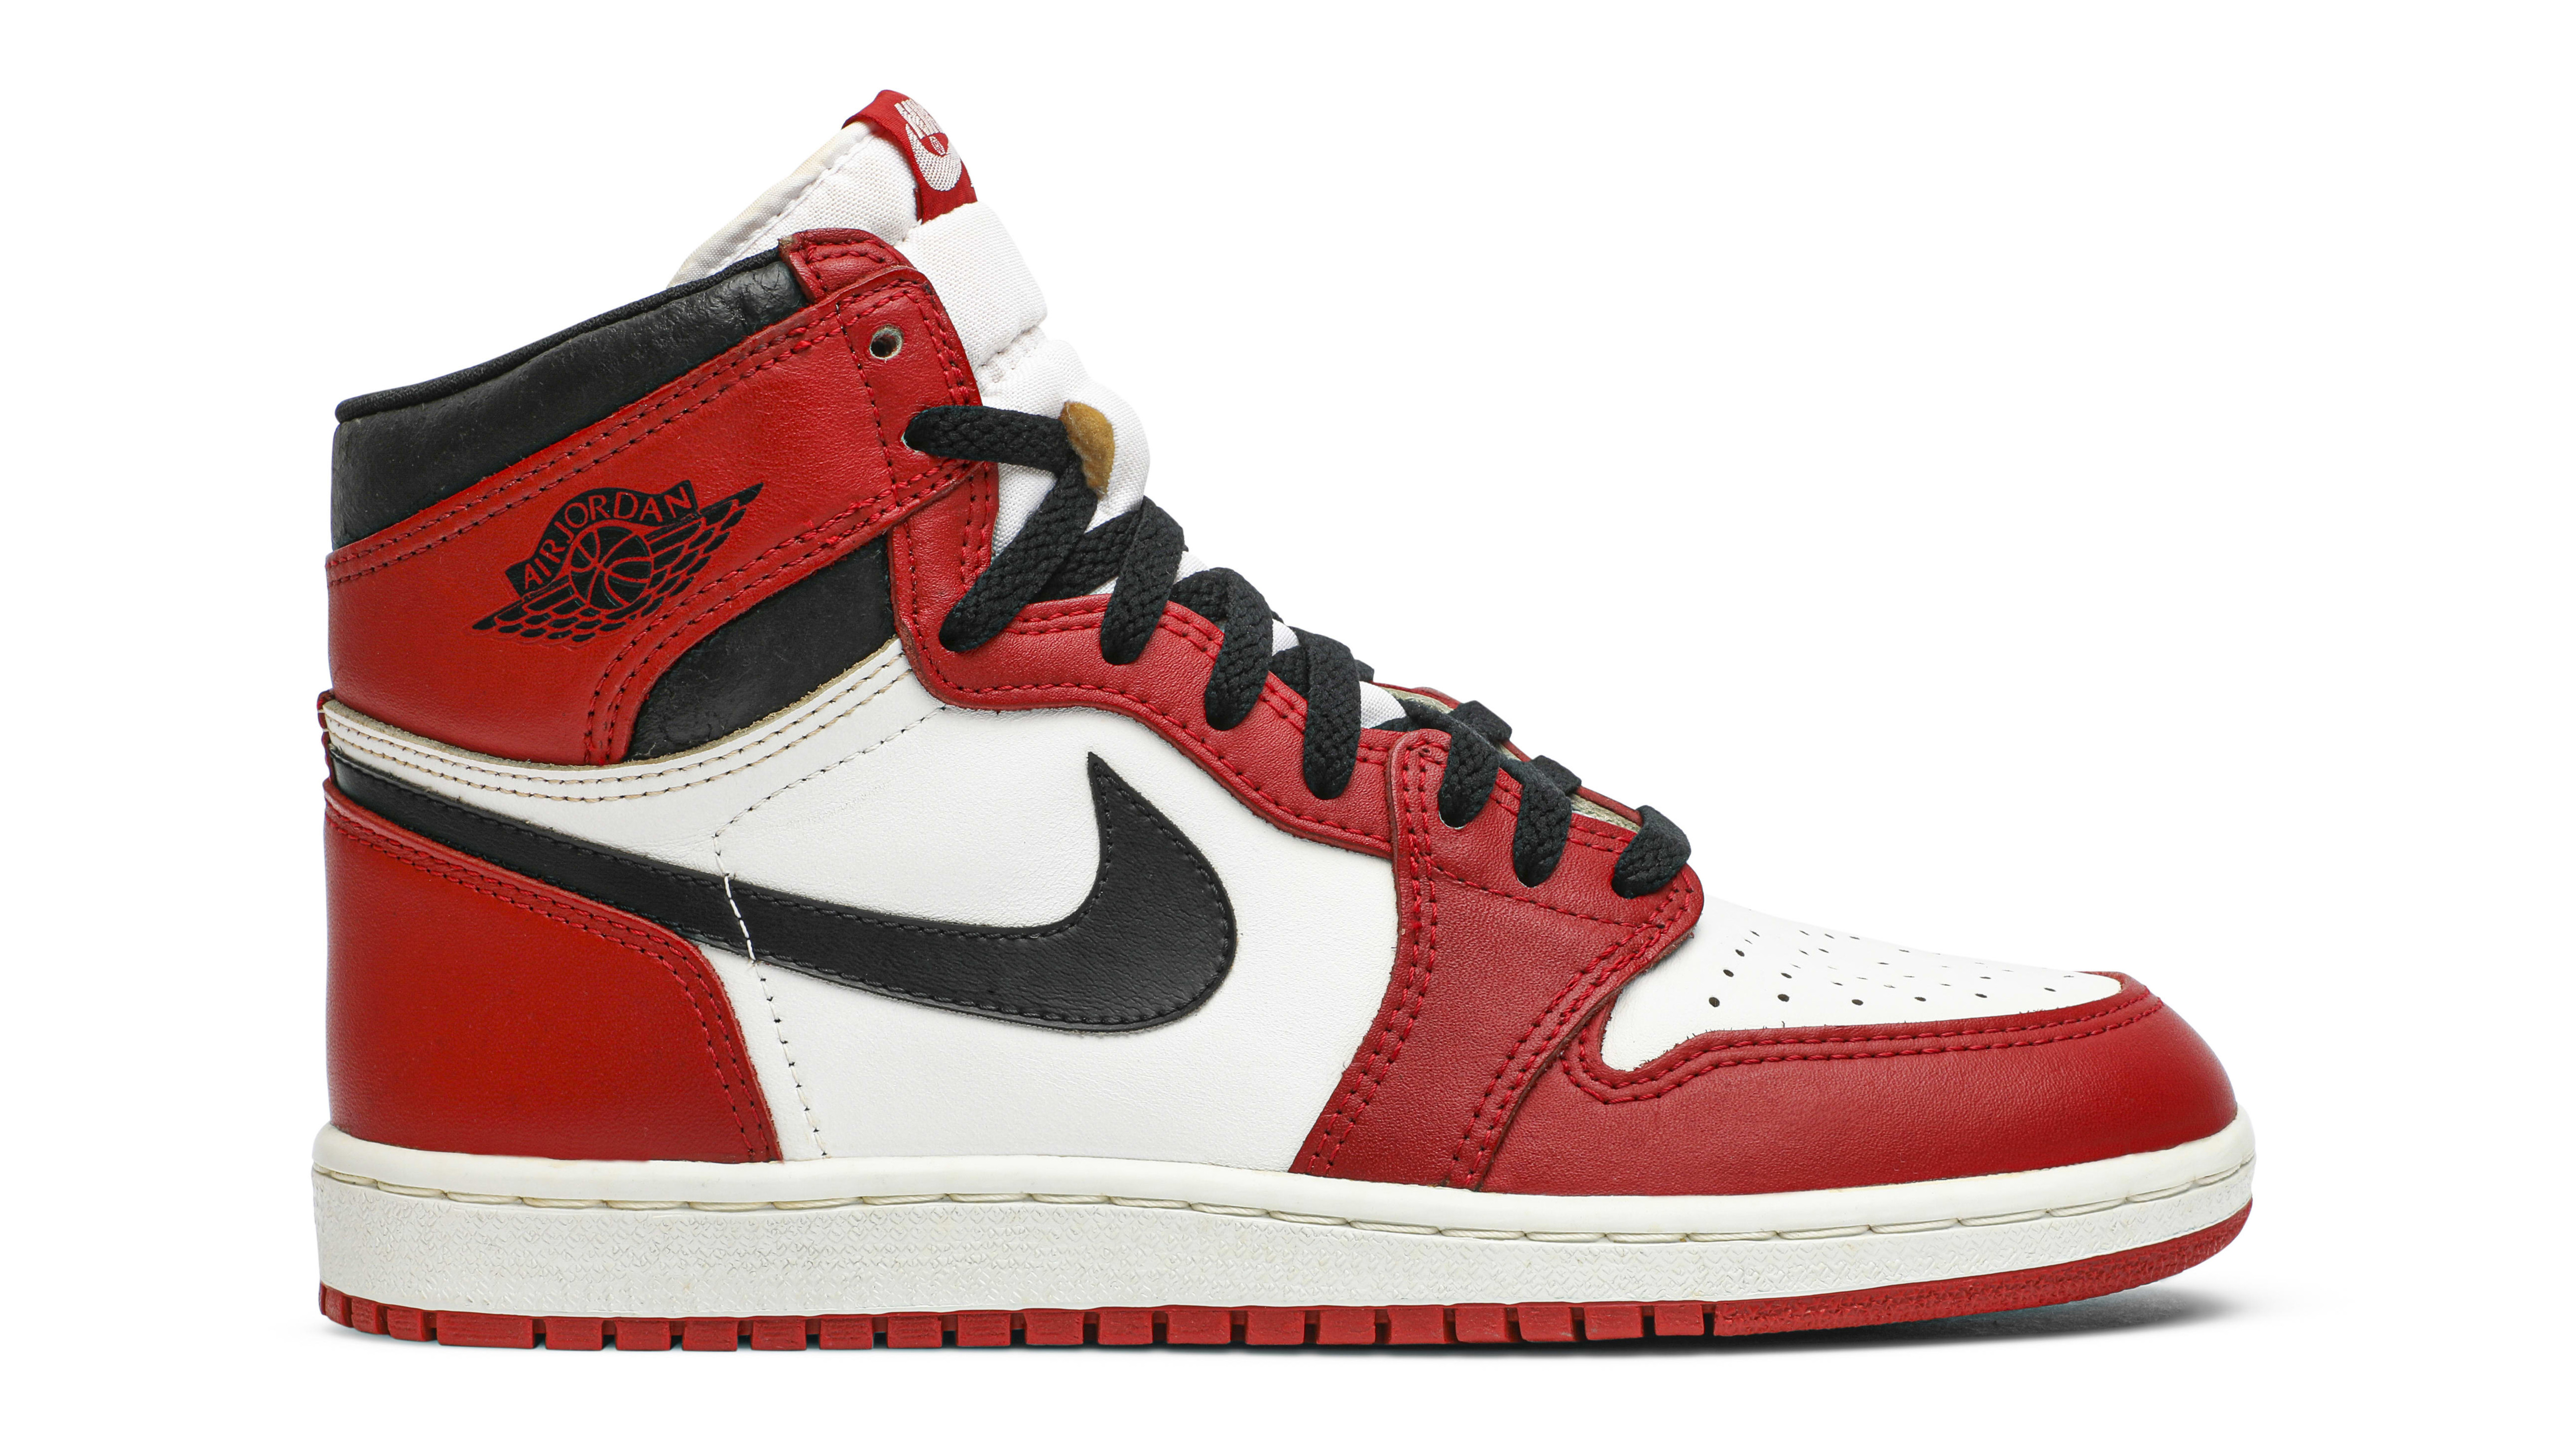 Nike's Air Jordan 1 Trademark Challenged in New Filing | Complex